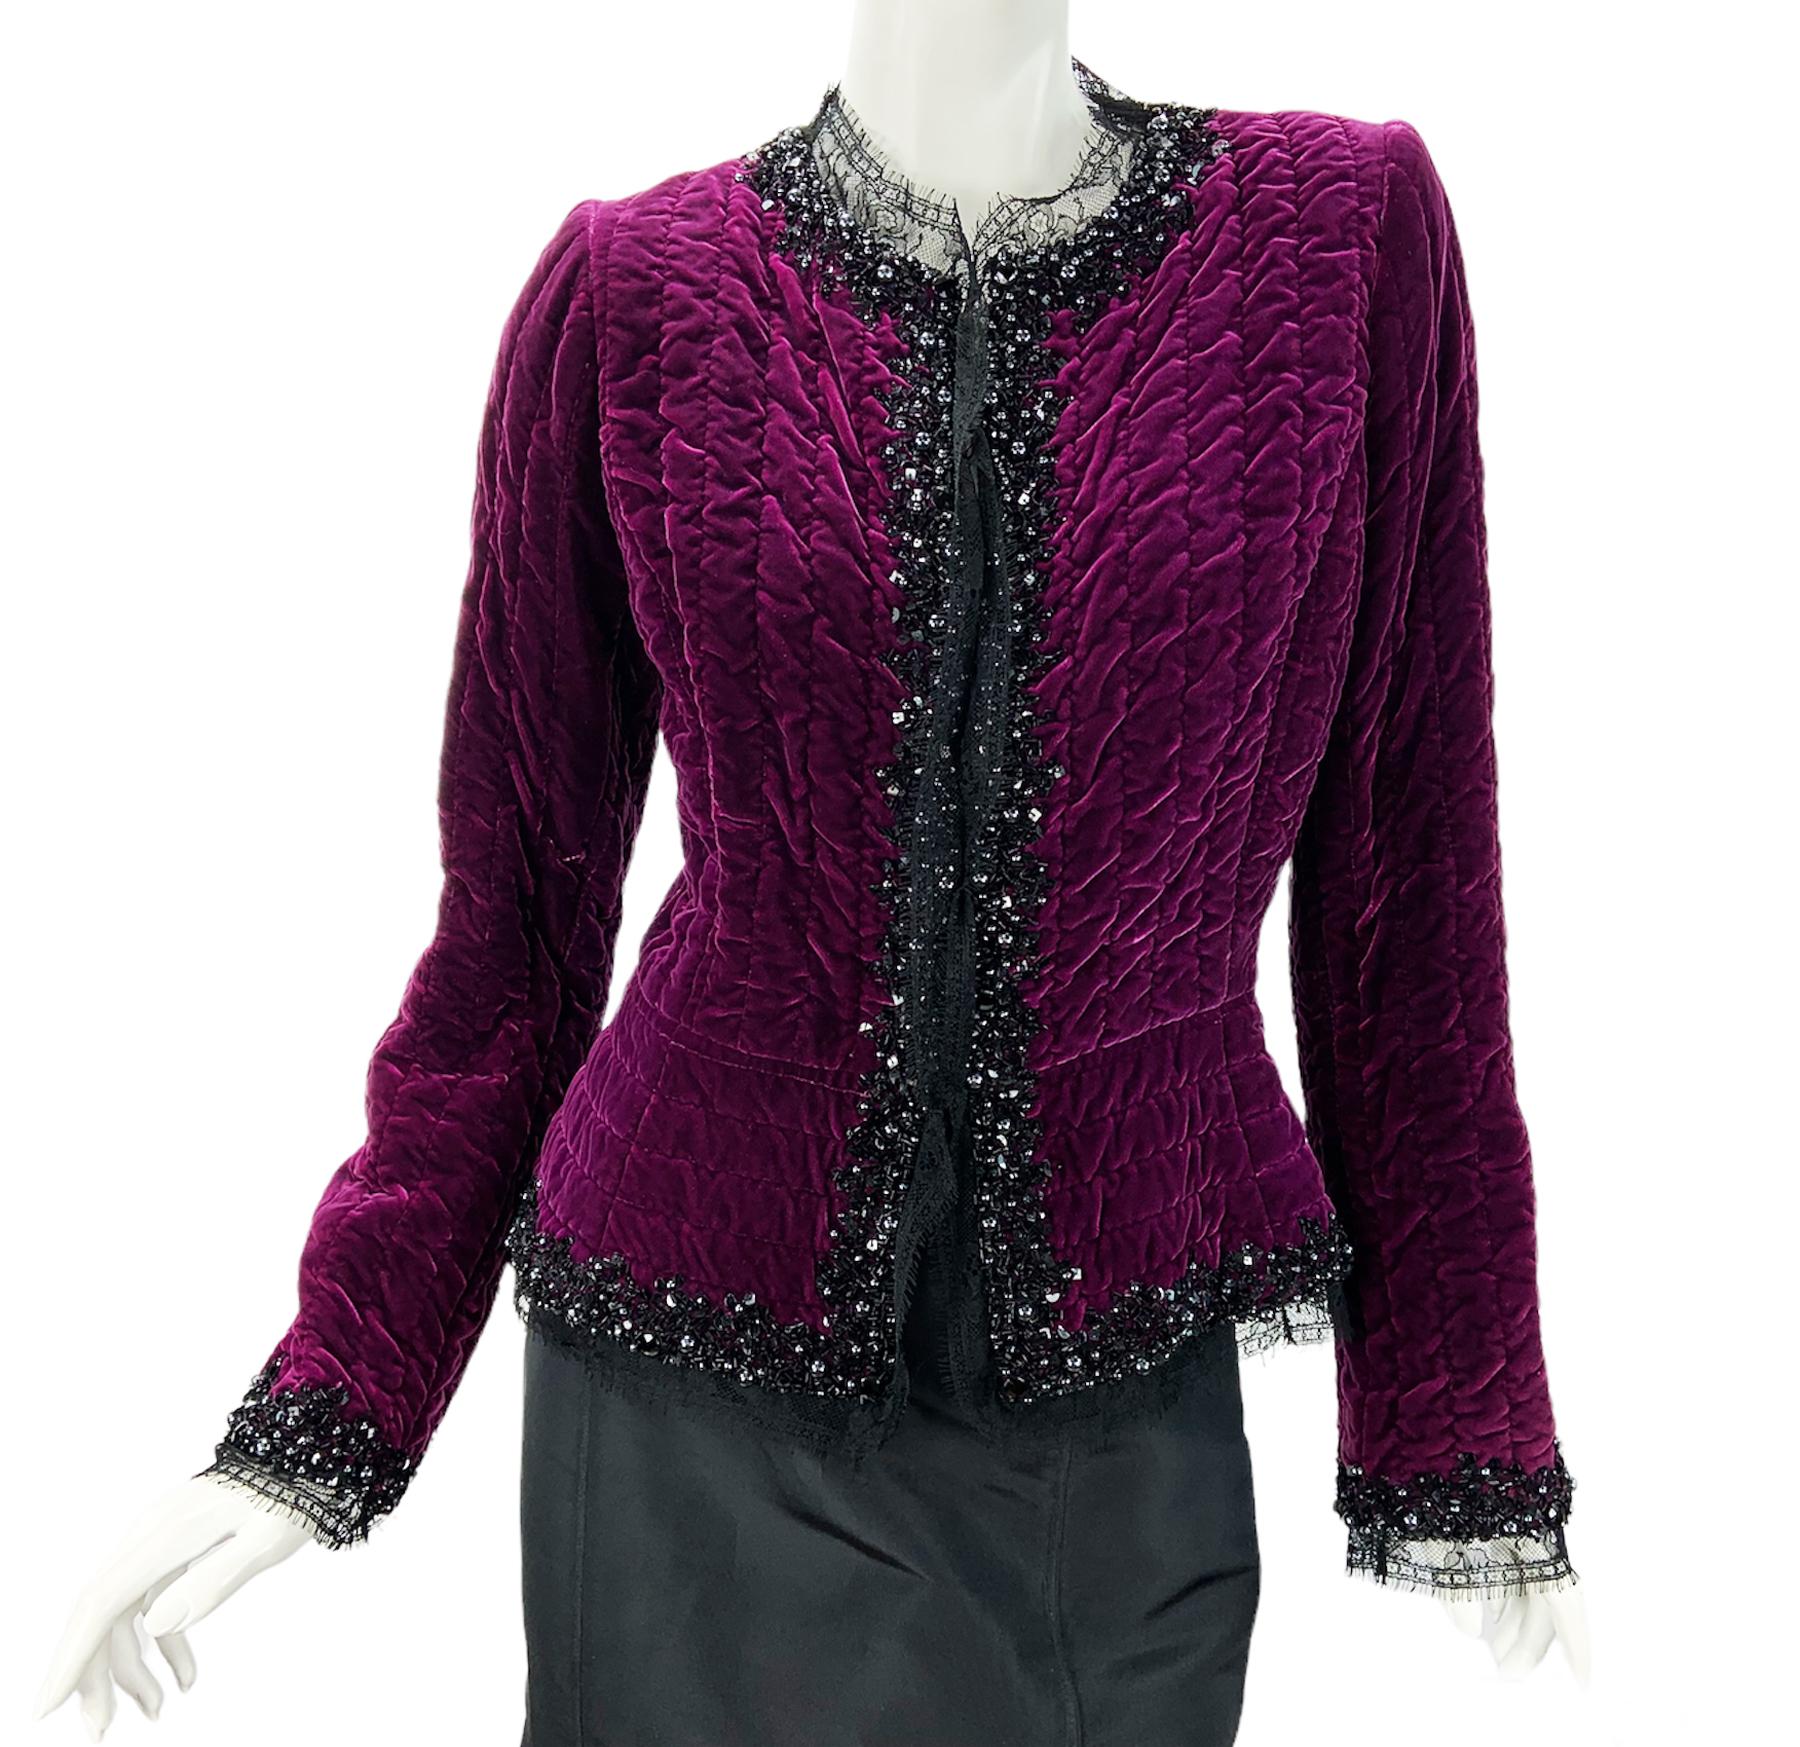 Vintage Oscar de la Renta Velvet Quilted Warm Embellished Fitted Jacket
US sizes available 8 and 10
Fitted Quilted Velvet Warm Jacket Finished with Lace, Beads and Sequins. Fully Lined, Peplum Style, Hook and Eye Closure, Padded